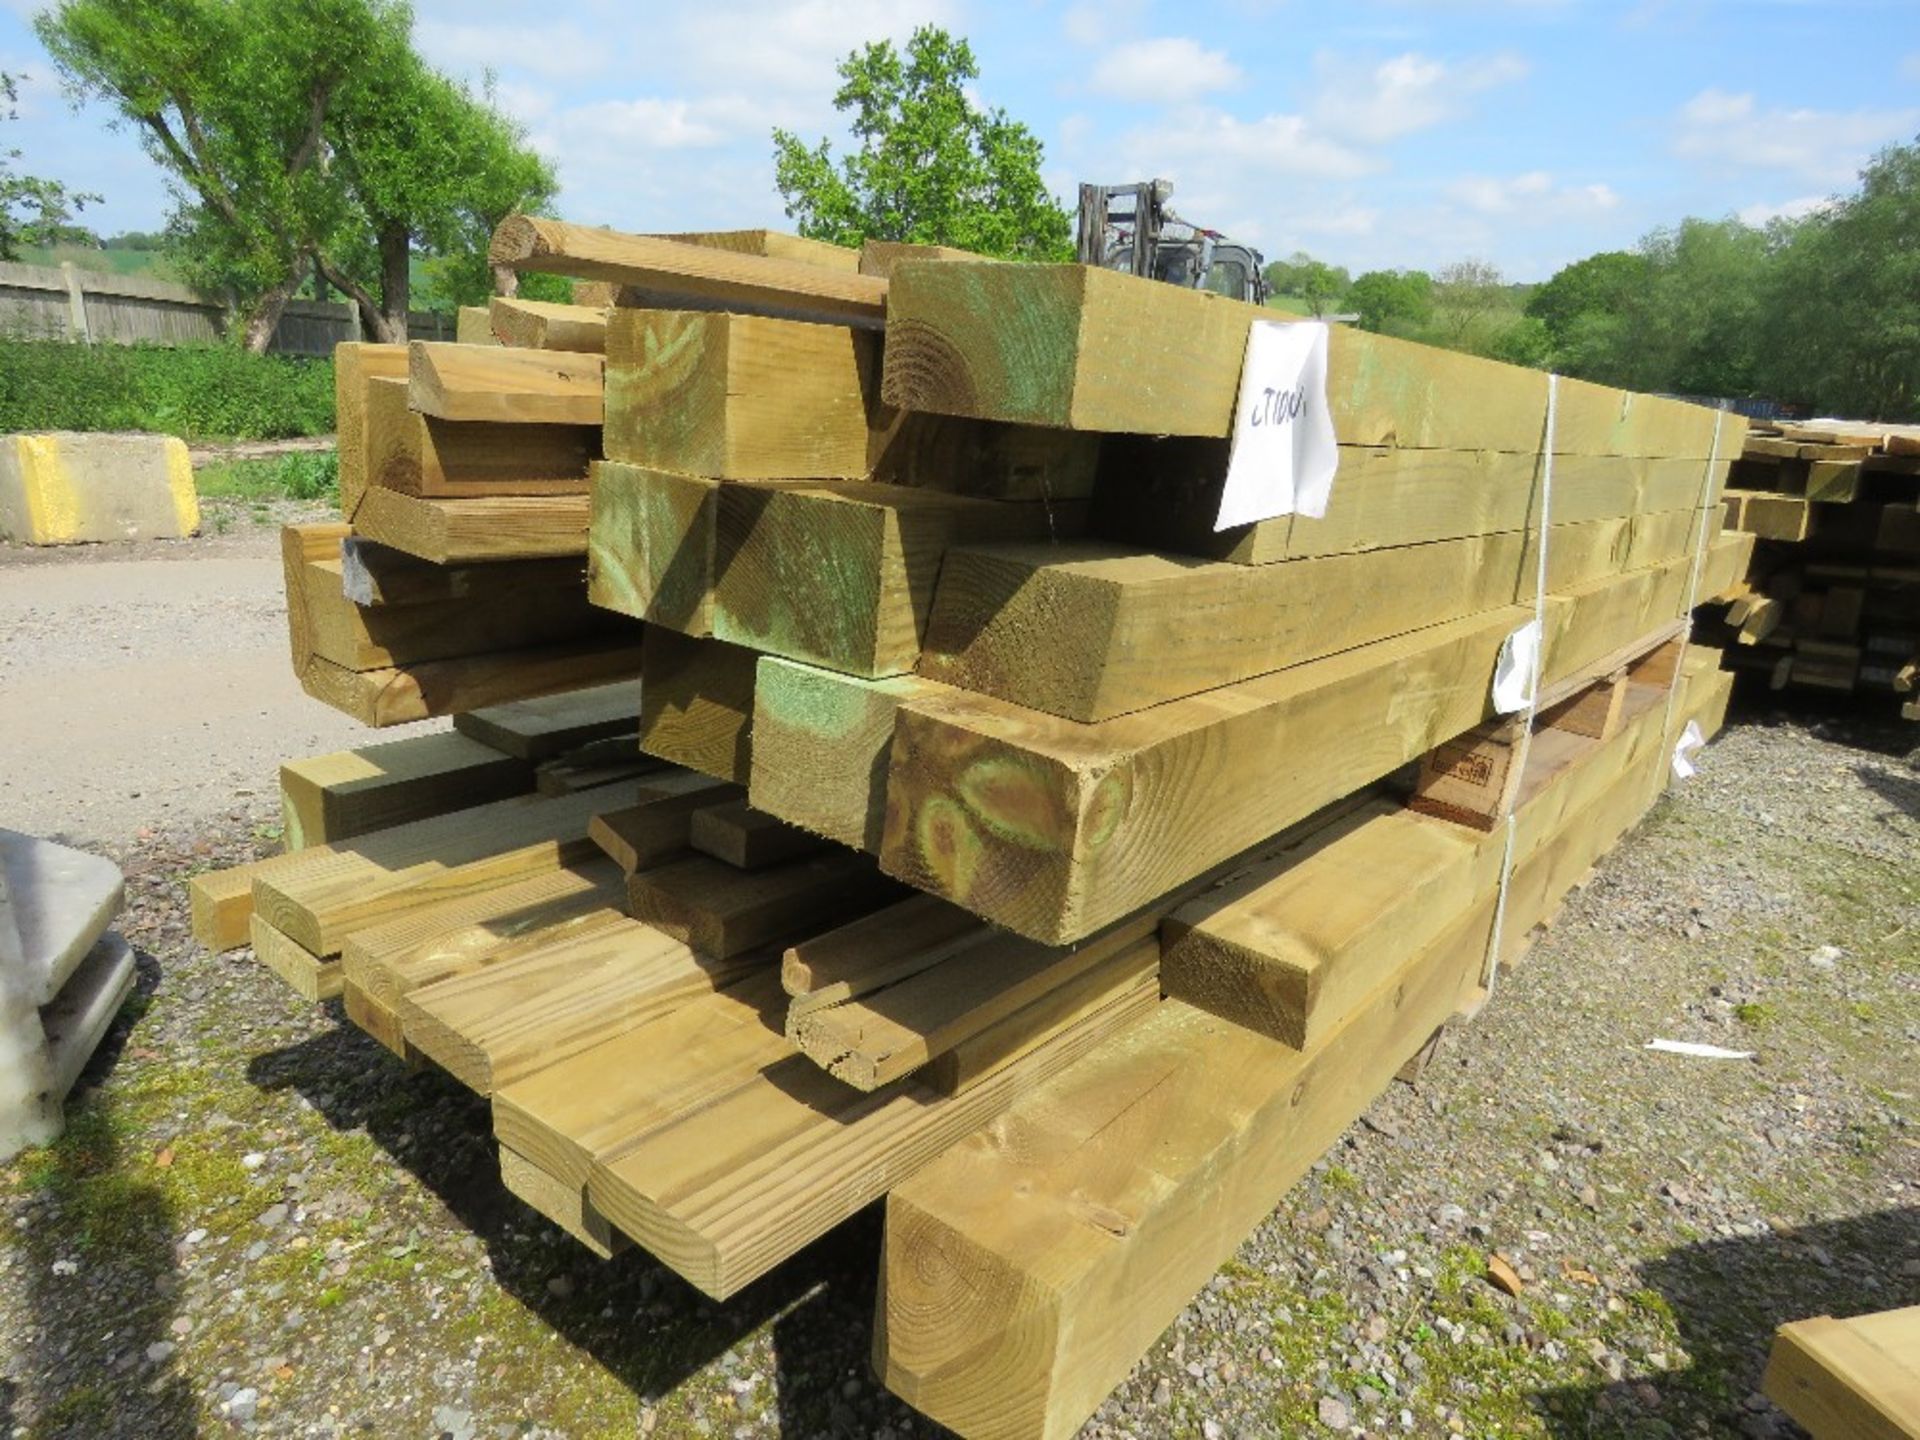 2 X BUNDLES OF TREATED FENCING TIMBERS, POSTS AND BOARDS AS SHOWN, 7-10FT LENGTH APPROX. - Image 4 of 4